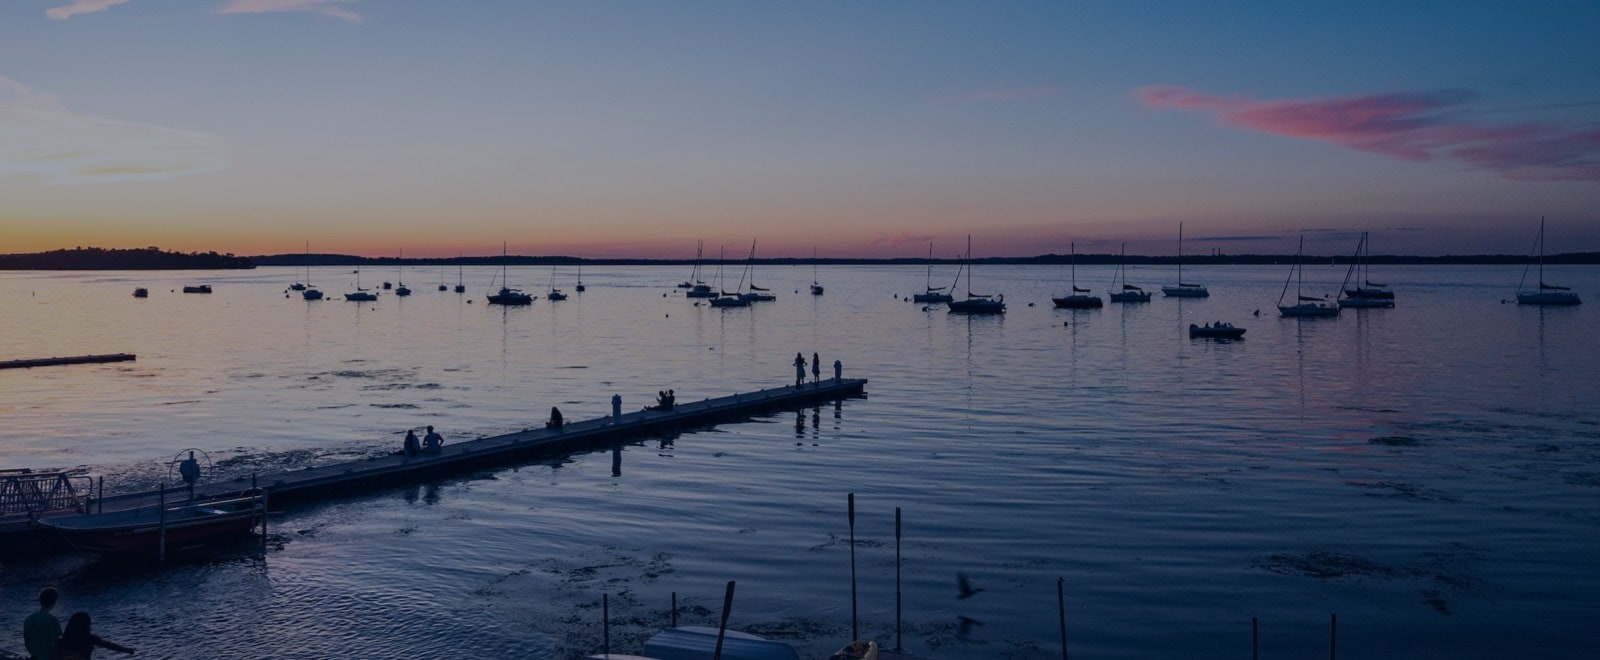 Sailboats rest at anchor on Lake Mendota under a summer evening sky as daylight fades into a palette of blues and pinks.